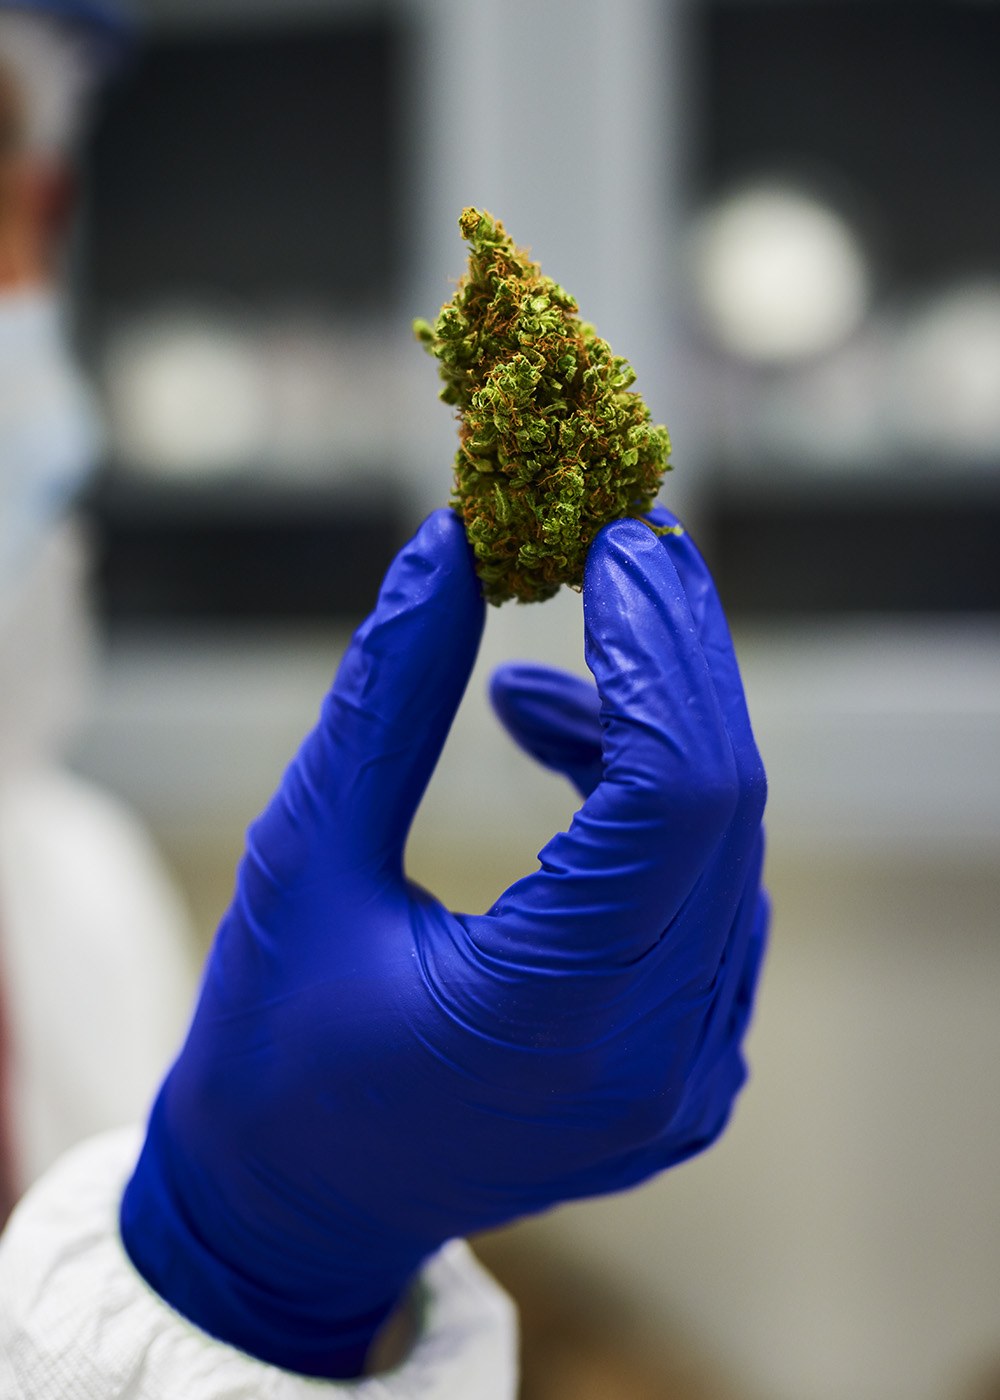 researcher-holding-cannabis-bud